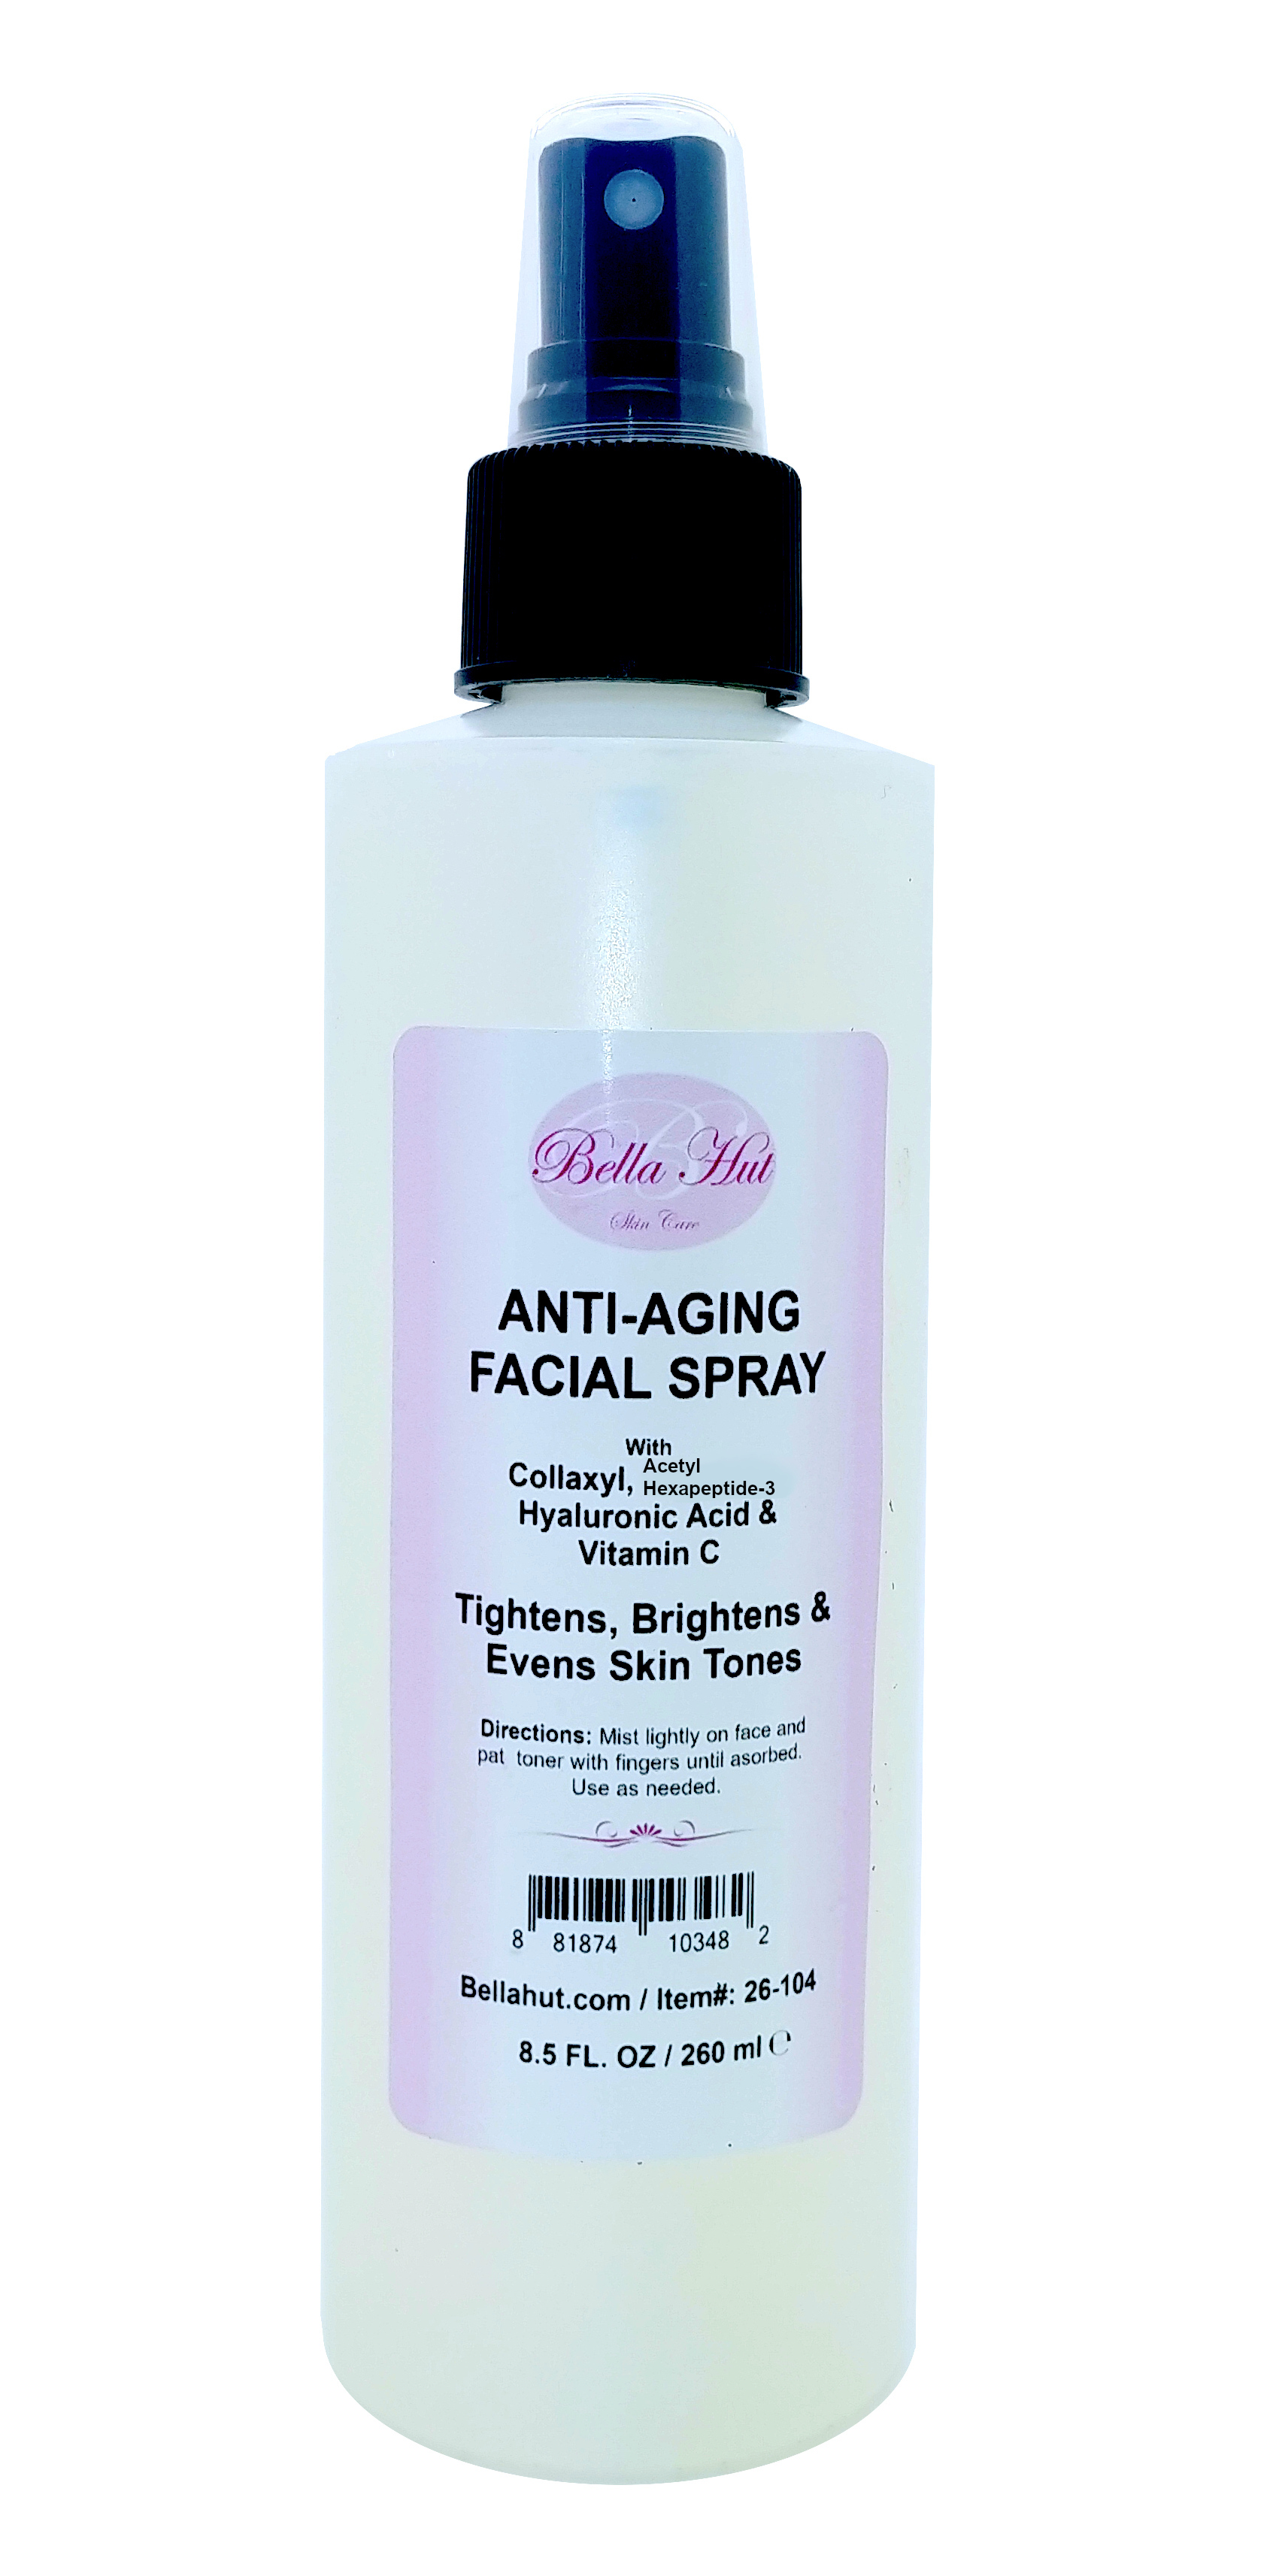 Anti Aging Facial Spray with Collaxyl Acetyl hexapeptide-3 Hyaluronic Acid and Vitamin C